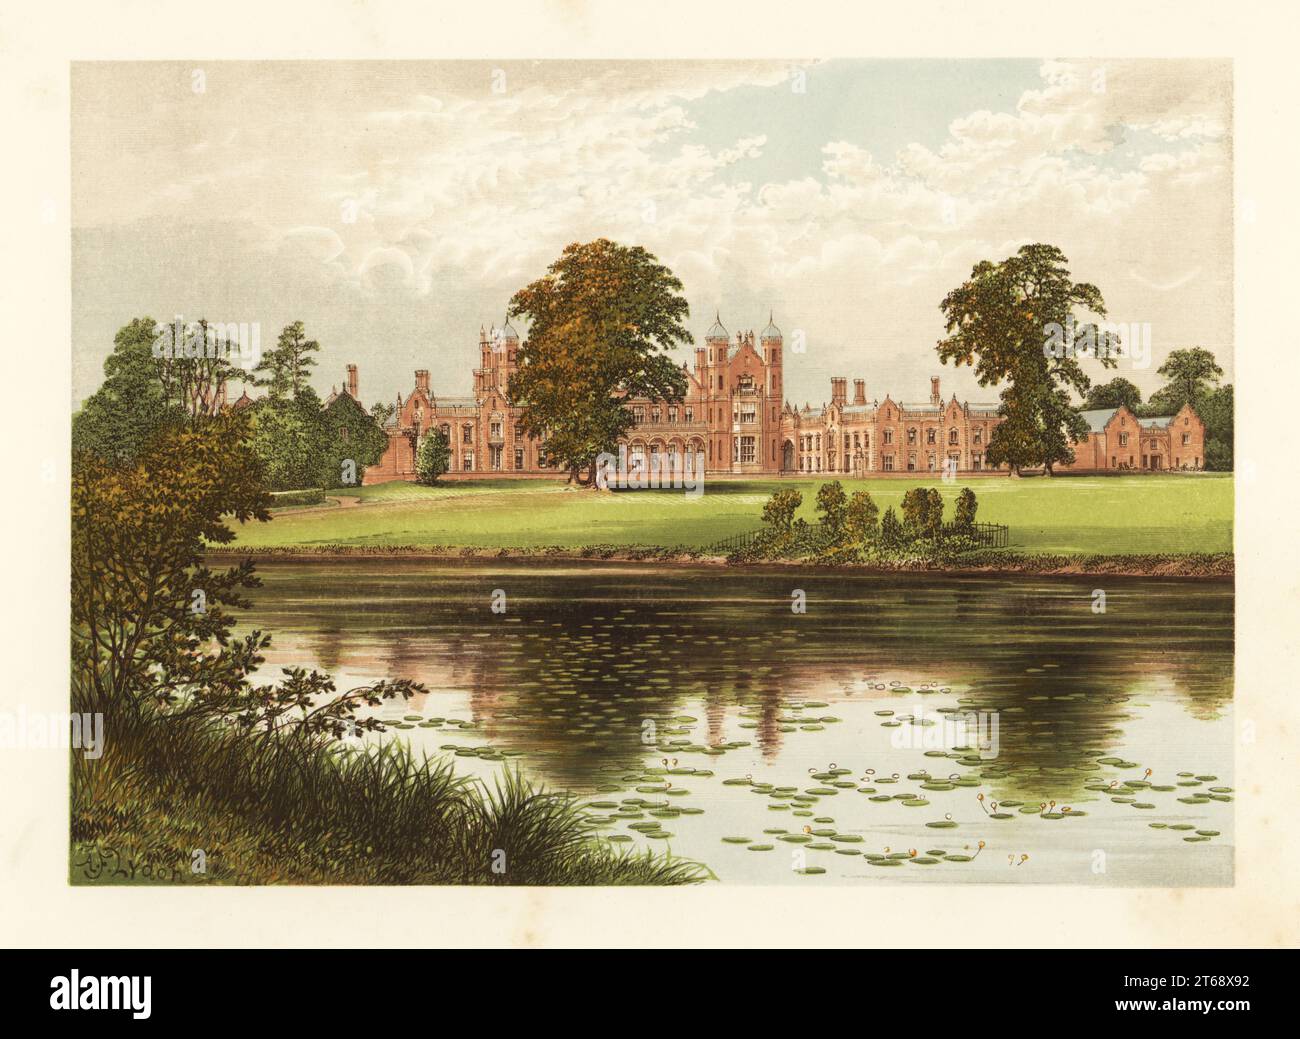 Capesthorne Hall, Cheshire, England. Neoclassical-style house in red brick built from designs by architect William Smith, remodelled with Jacobean style frontage in the 1830s by Edward Blore. Conservatory by Joseph Paxton. Home of Arthur Henry Davenport. Colour woodblock by Benjamin Fawcett in the Baxter process of an illustration by Alexander Francis Lydon from Reverend Francis Orpen Morriss Picturesque Views of the Seats of Noblemen and Gentlemen of Great Britain and Ireland, William Mackenzie, London, 1880. Stock Photo